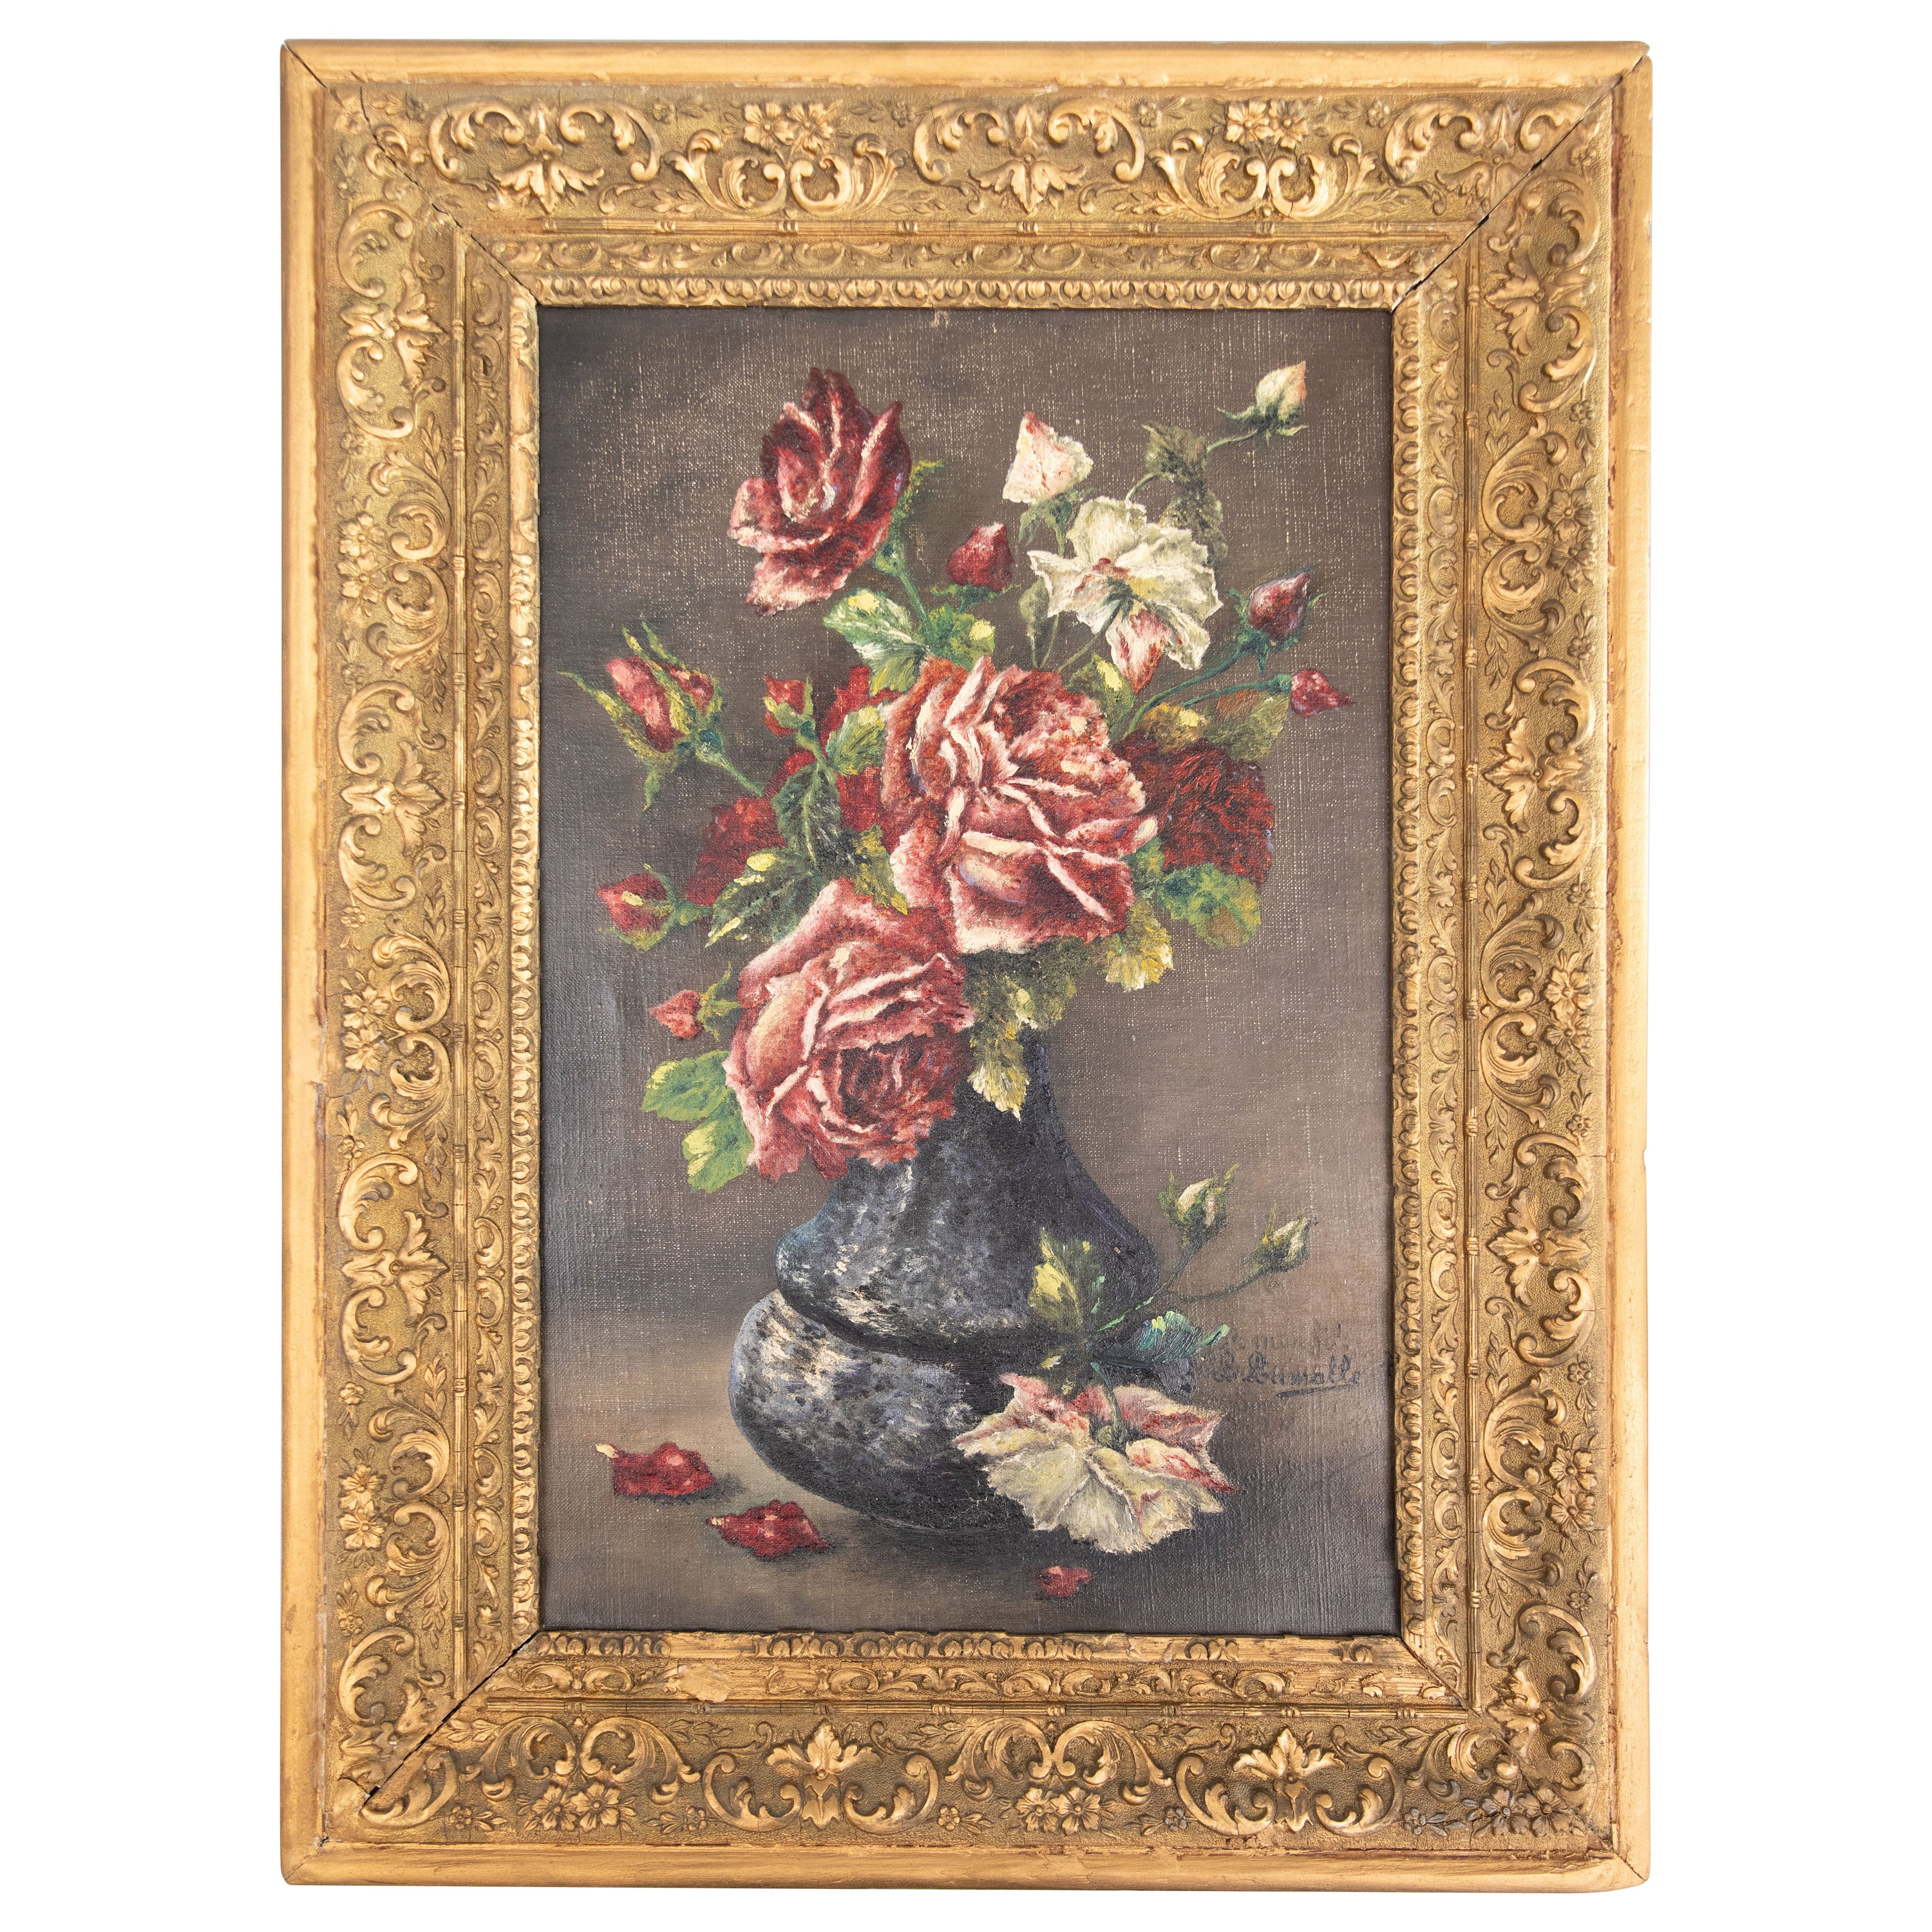 19th Century French Floral Still Life Painting of Roses, Oil on Canvas, Signed